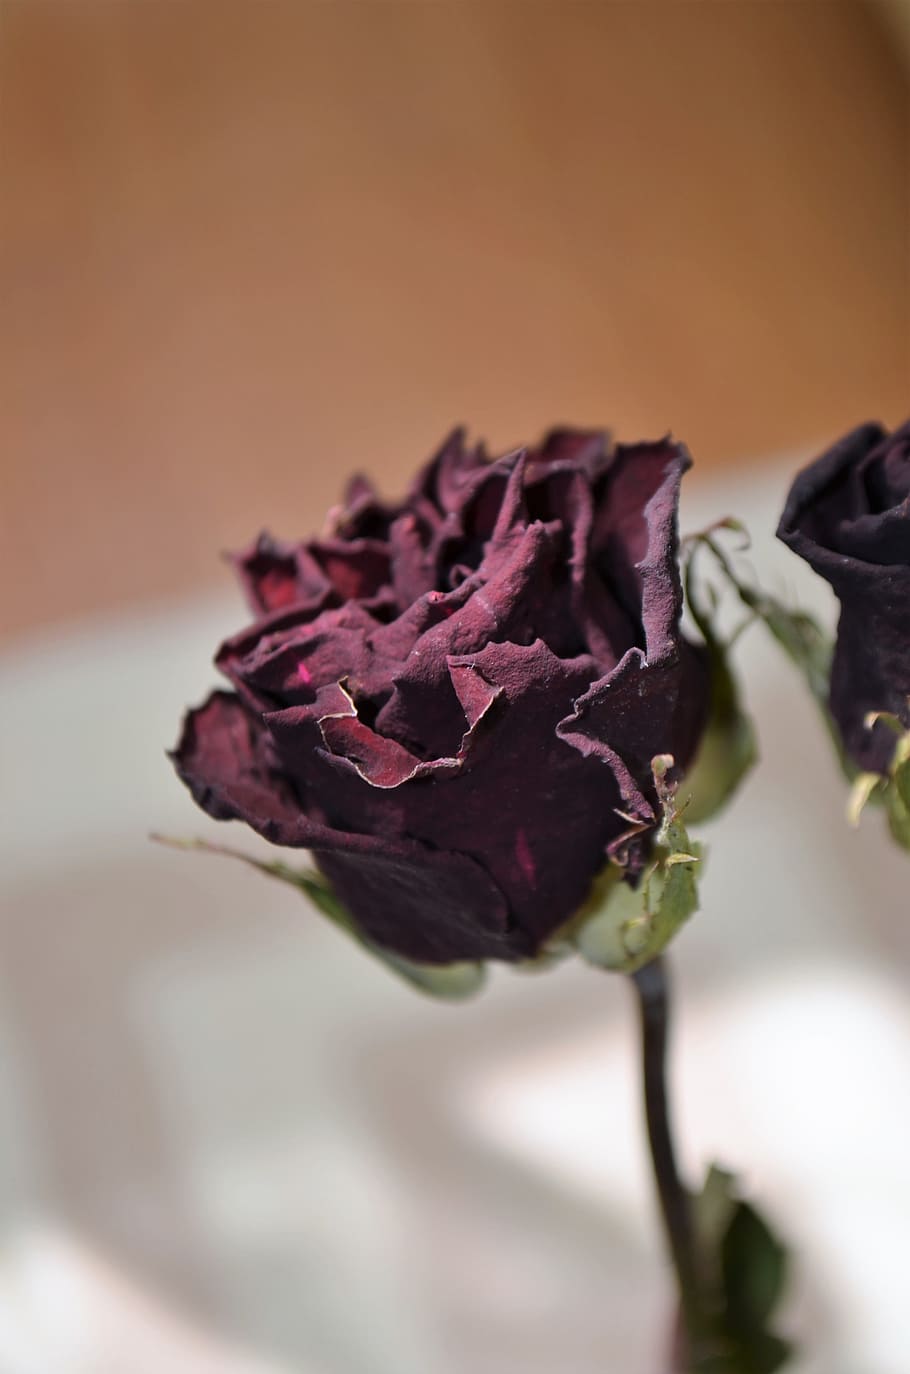 Macro, Color, rose, dried rose, dried up, plant, nature, beautiful, flower picture, close